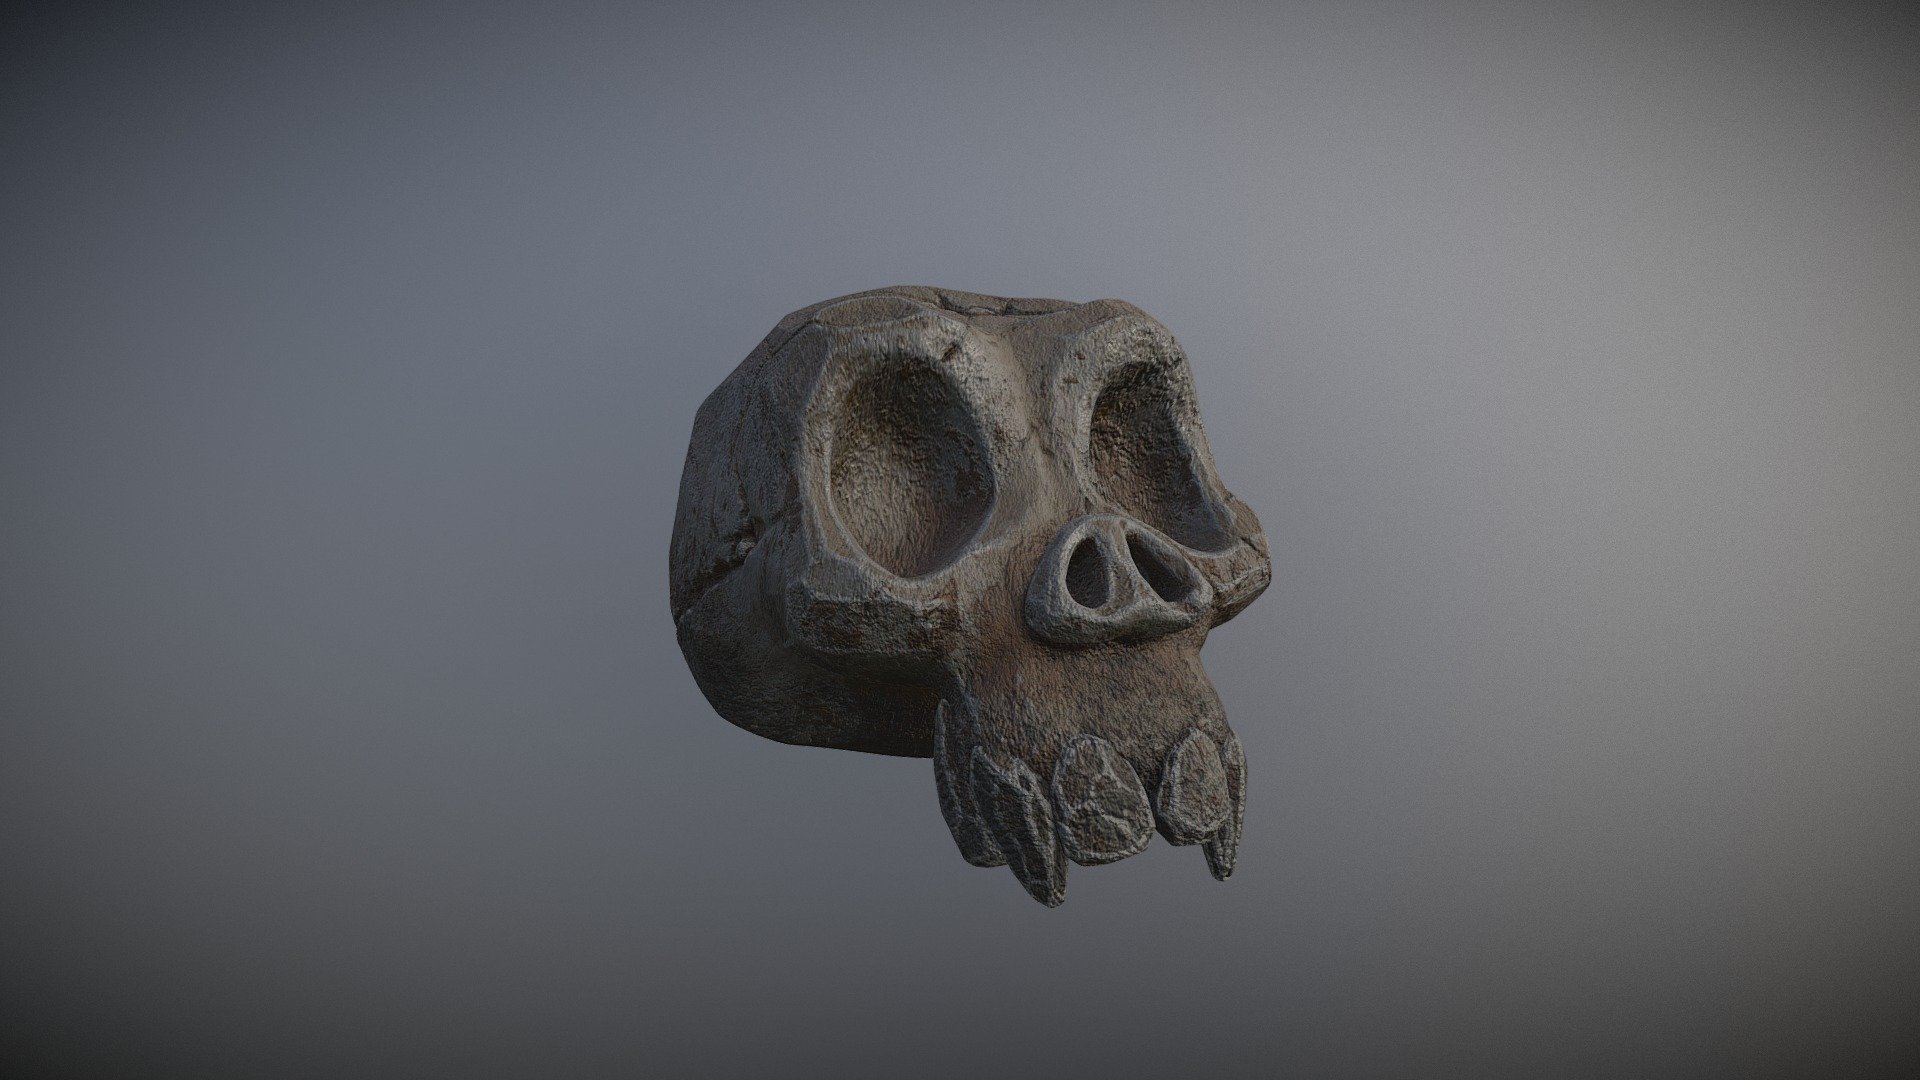 An old stone skull sculpted in ZBrush, textured in substance painter - Stone skull - 3D model by Bojan Tomic (@anthorax) 3d model